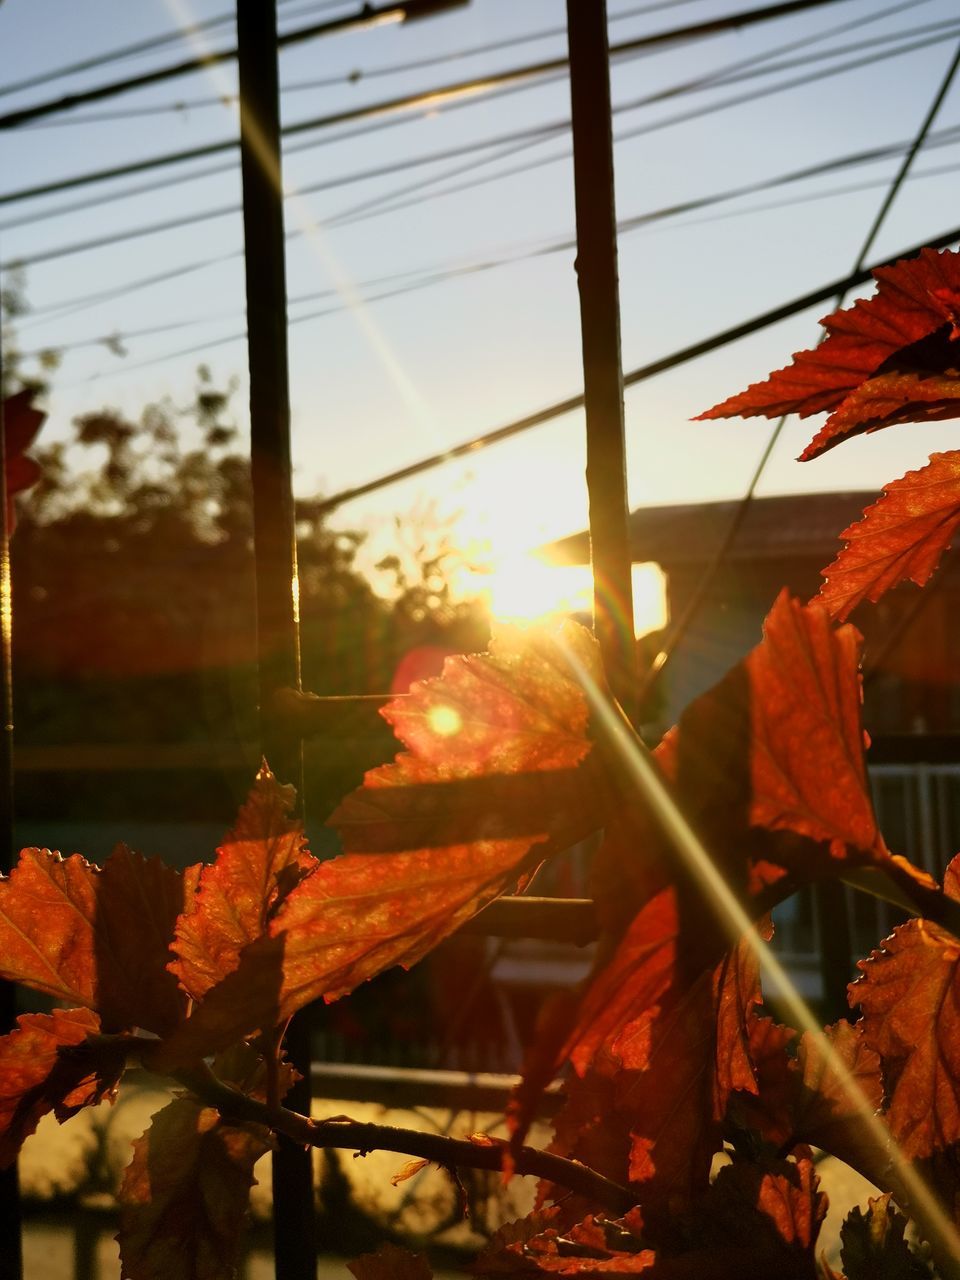 nature, autumn, sunlight, sky, red, flower, plant, evening, sunset, leaf, orange color, day, outdoors, lens flare, sun, beauty in nature, no people, architecture, growth, light, sunbeam, built structure, plant part, tree, back lit